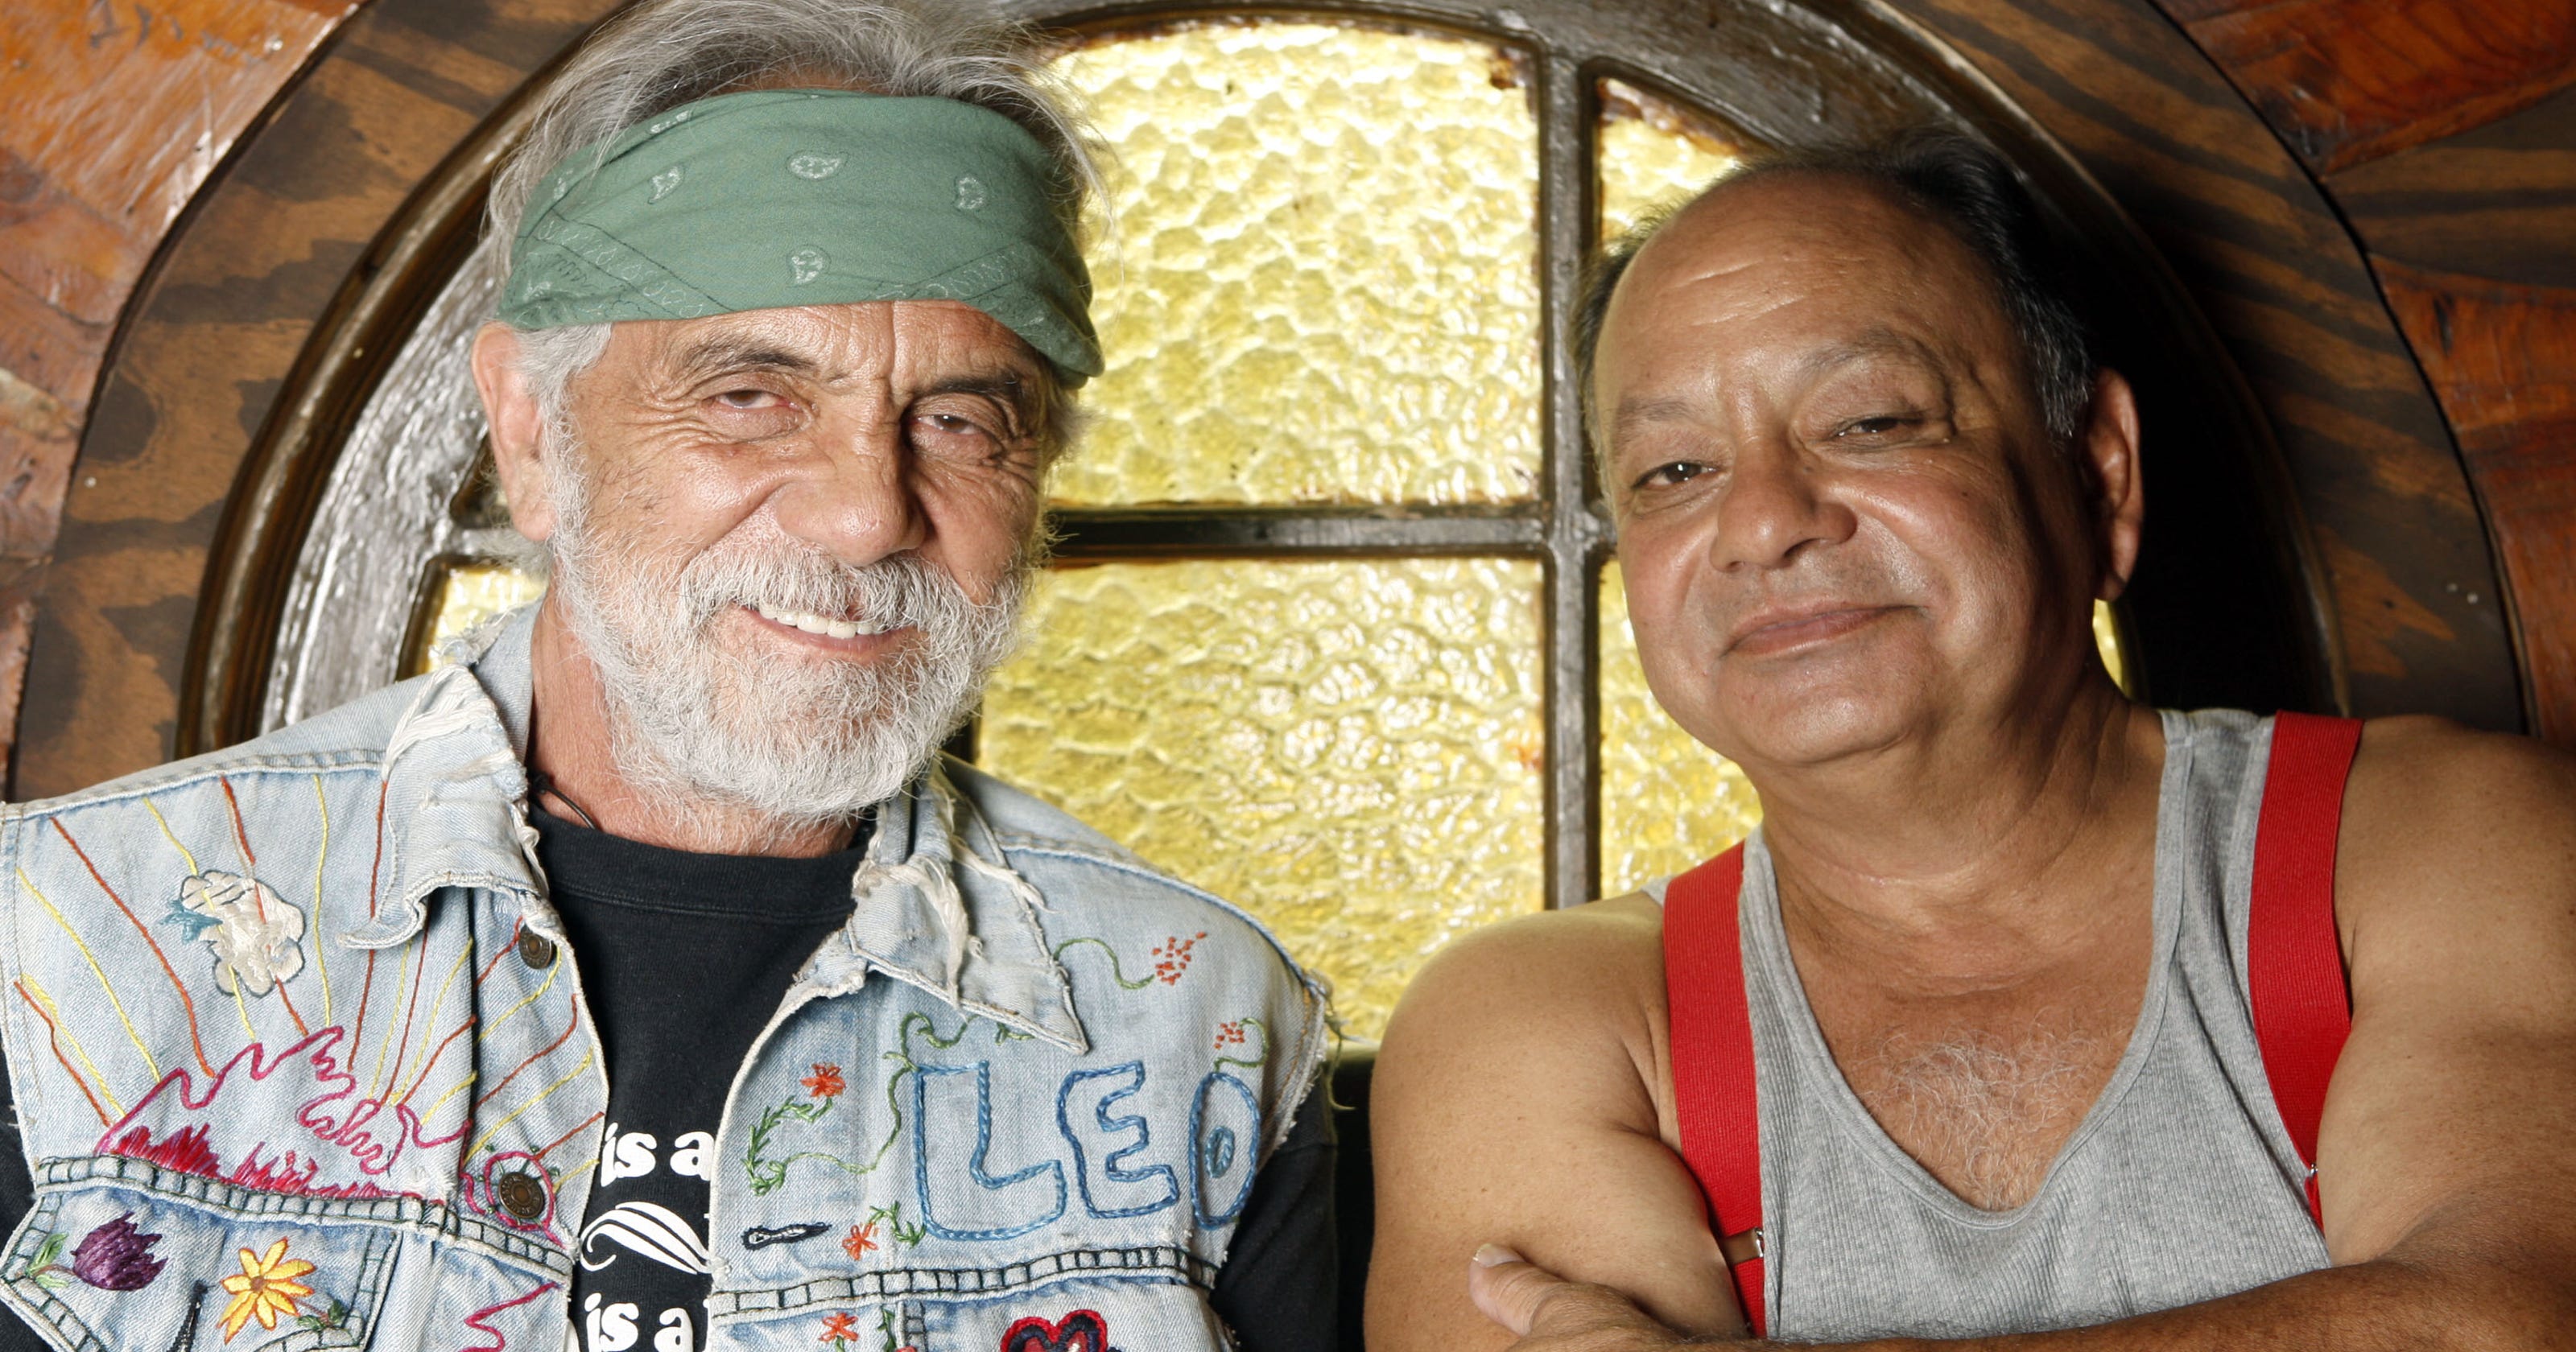 Cheech & Chong set to have high time at Eagle Mountain Casino